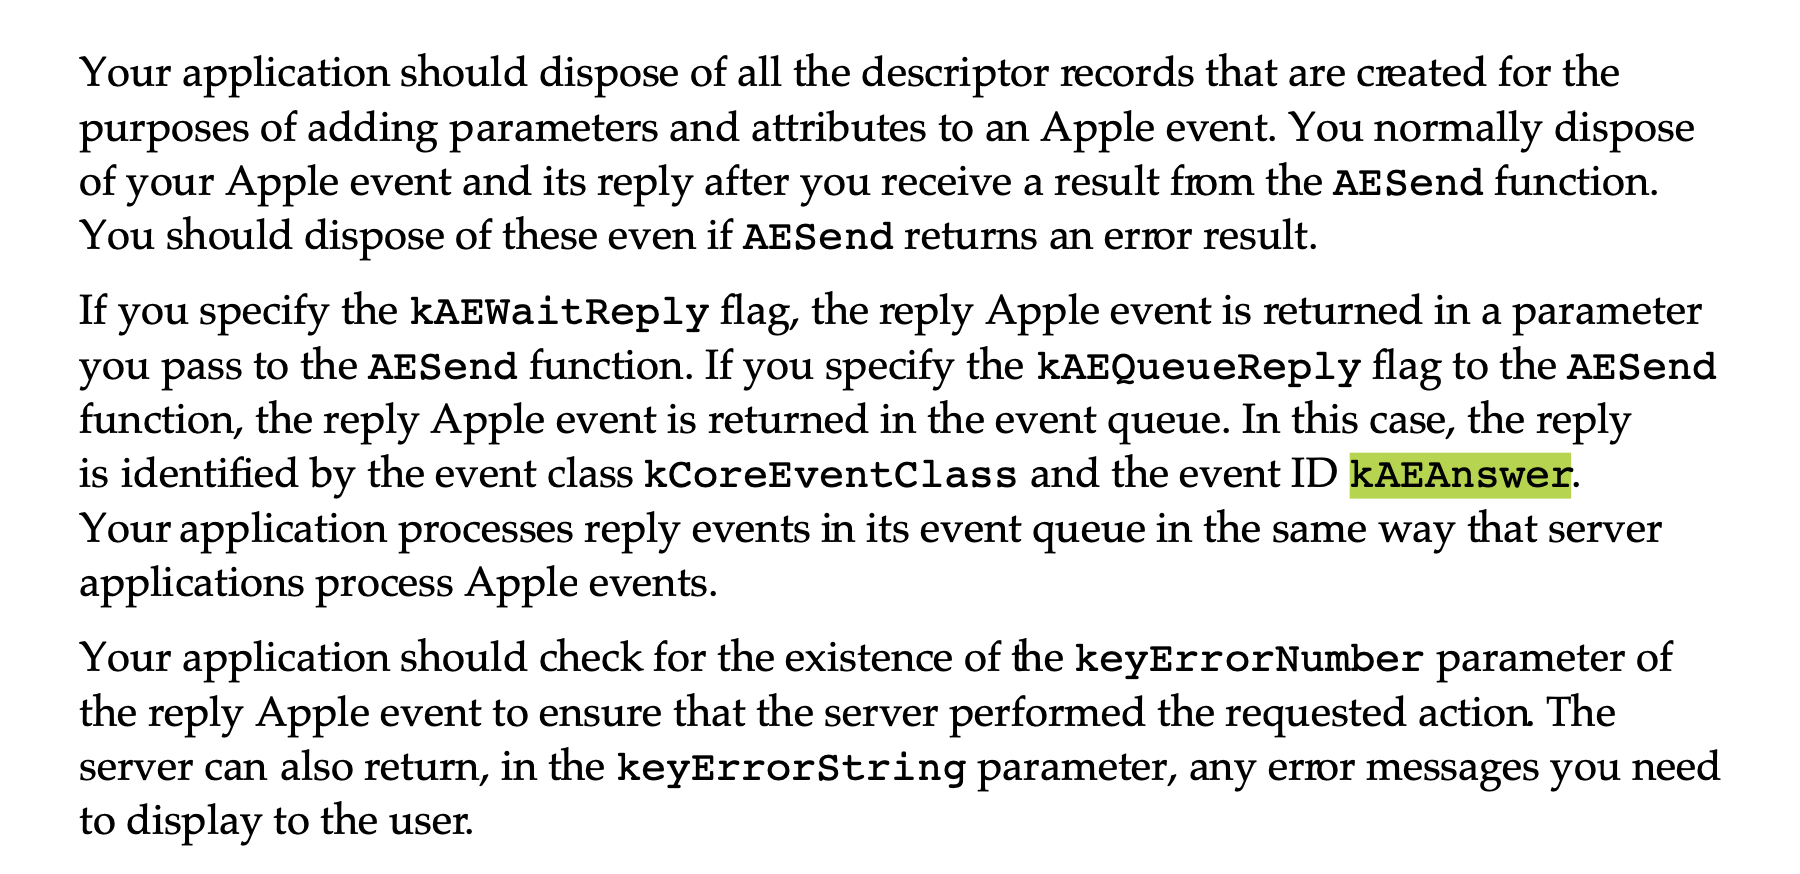 Screenshot of documentation from Apple's original Inside Mac series of programming references, revealing detailed explanations of the process of sending AppleEvents and what to expect in return.